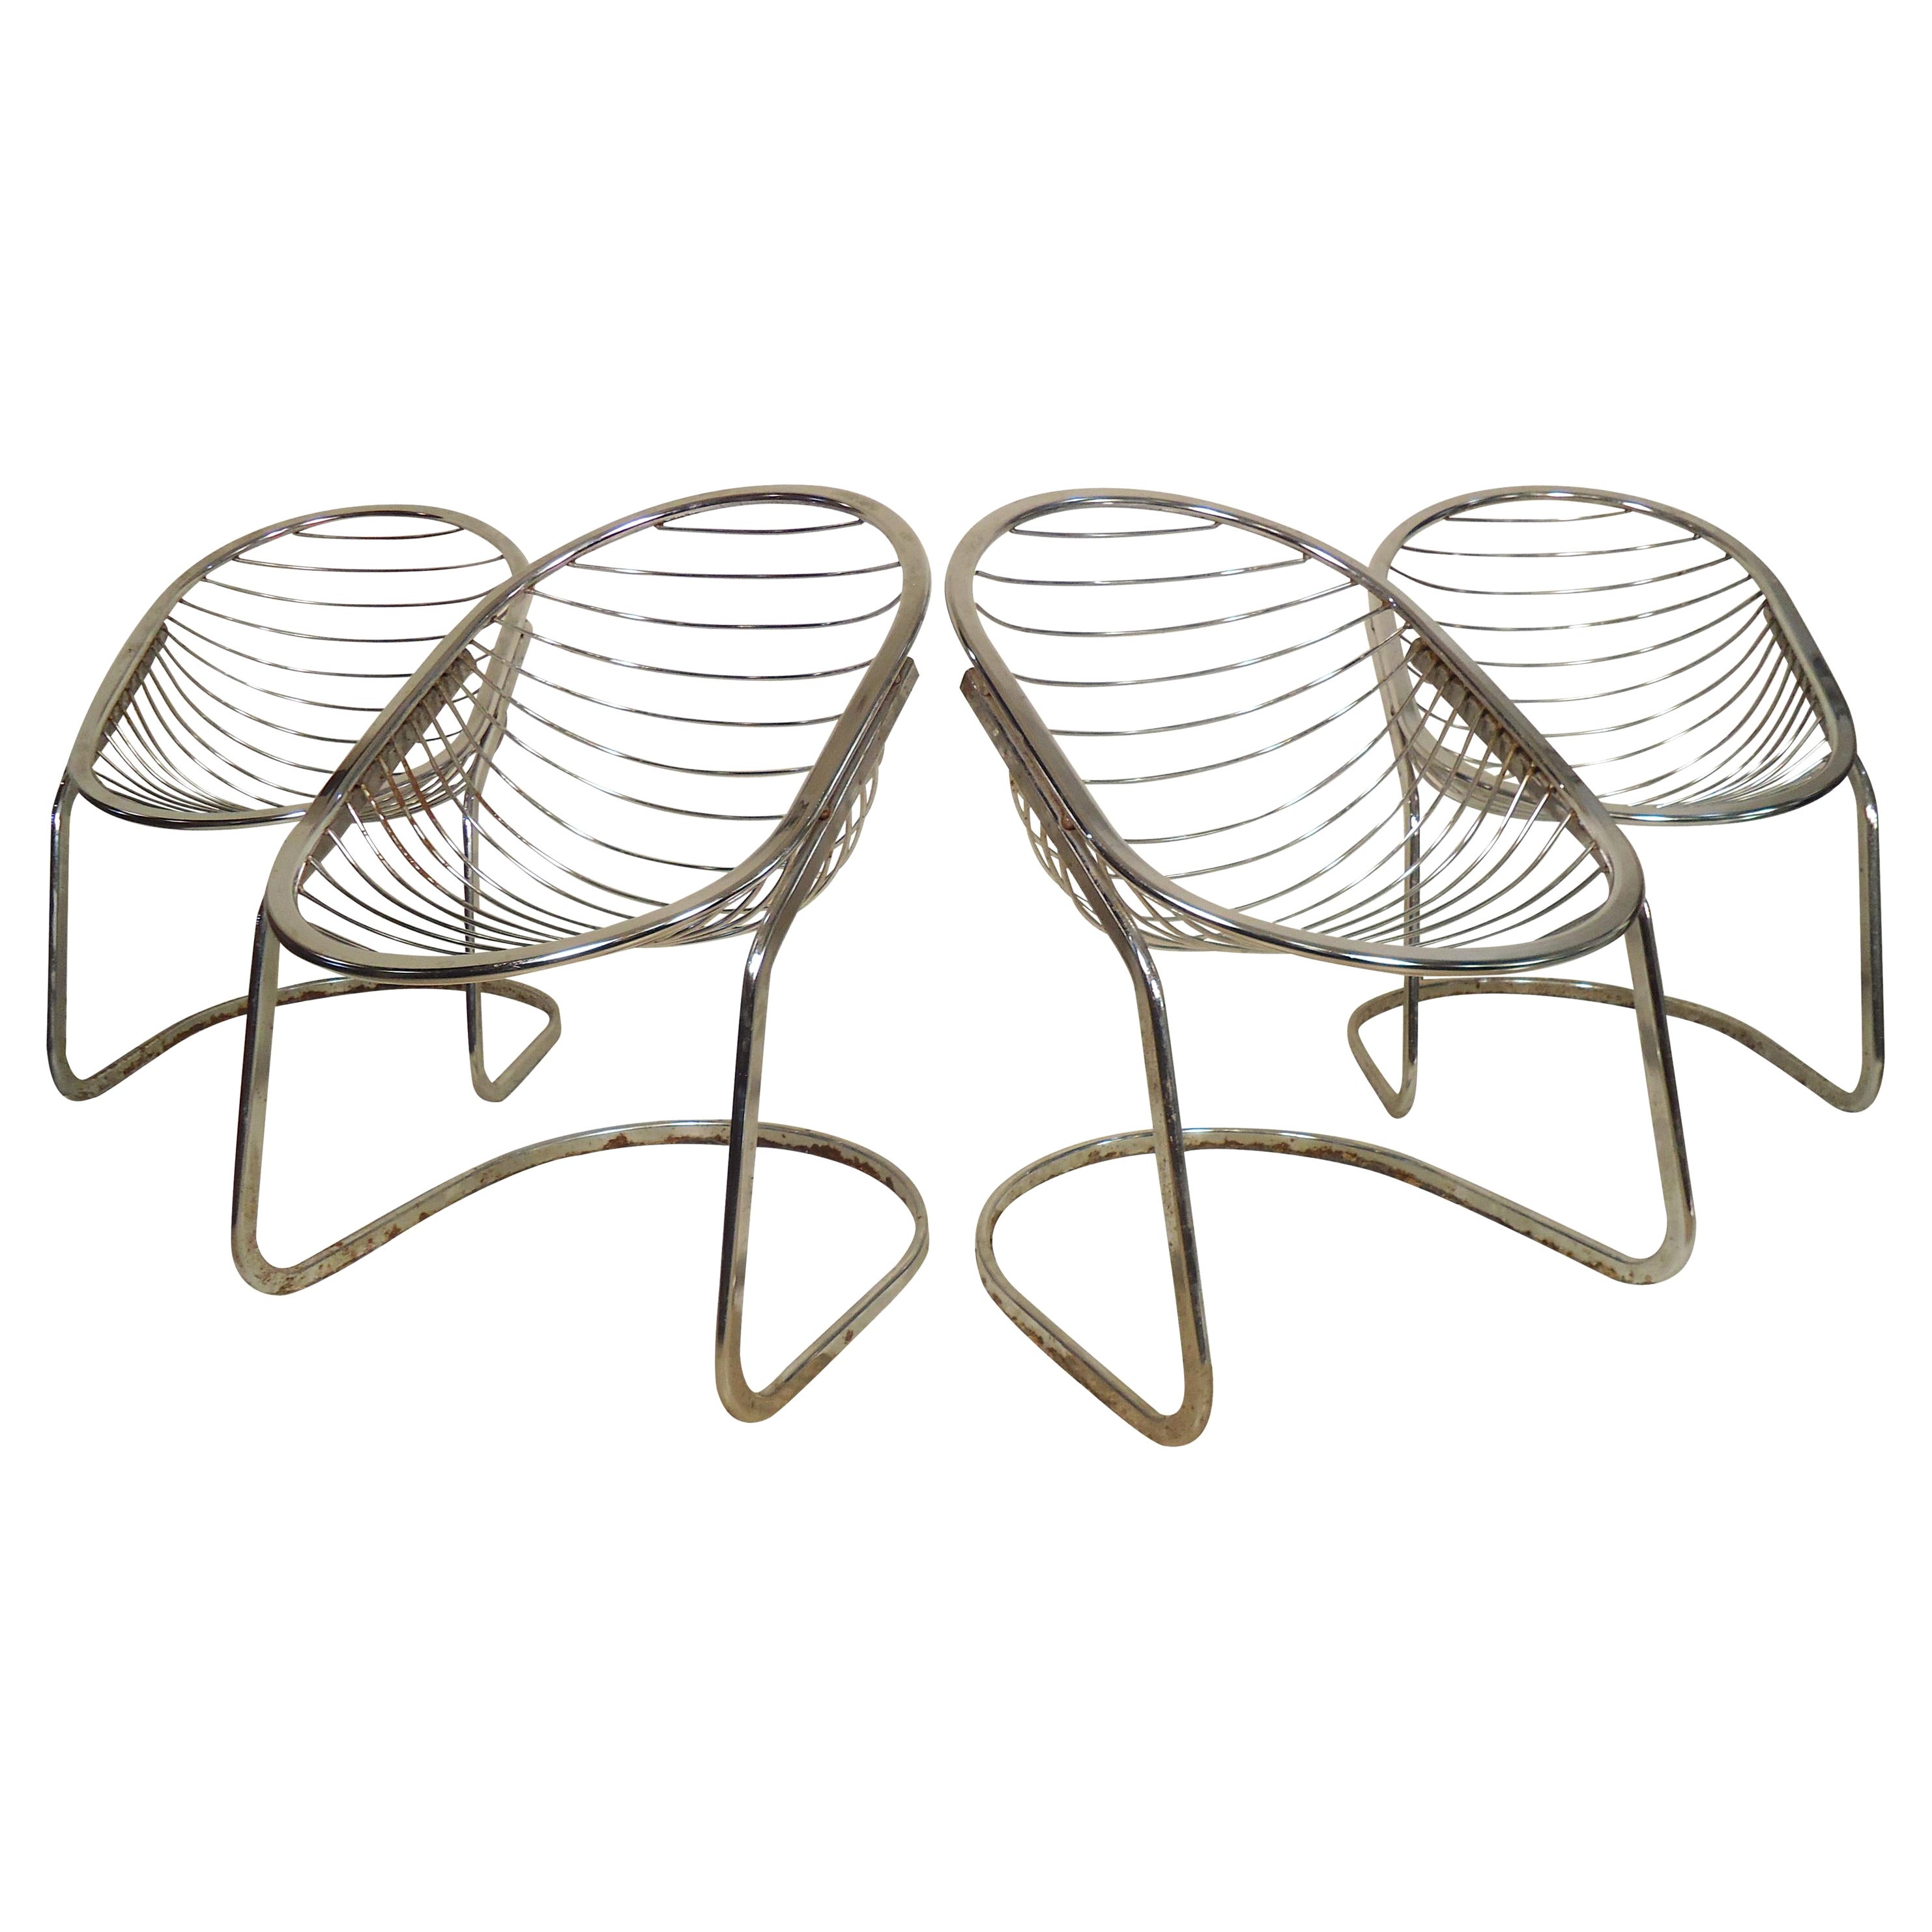 RIMA Egg Chair Set of 4 Dining Chairs by Gastone Rinaldi